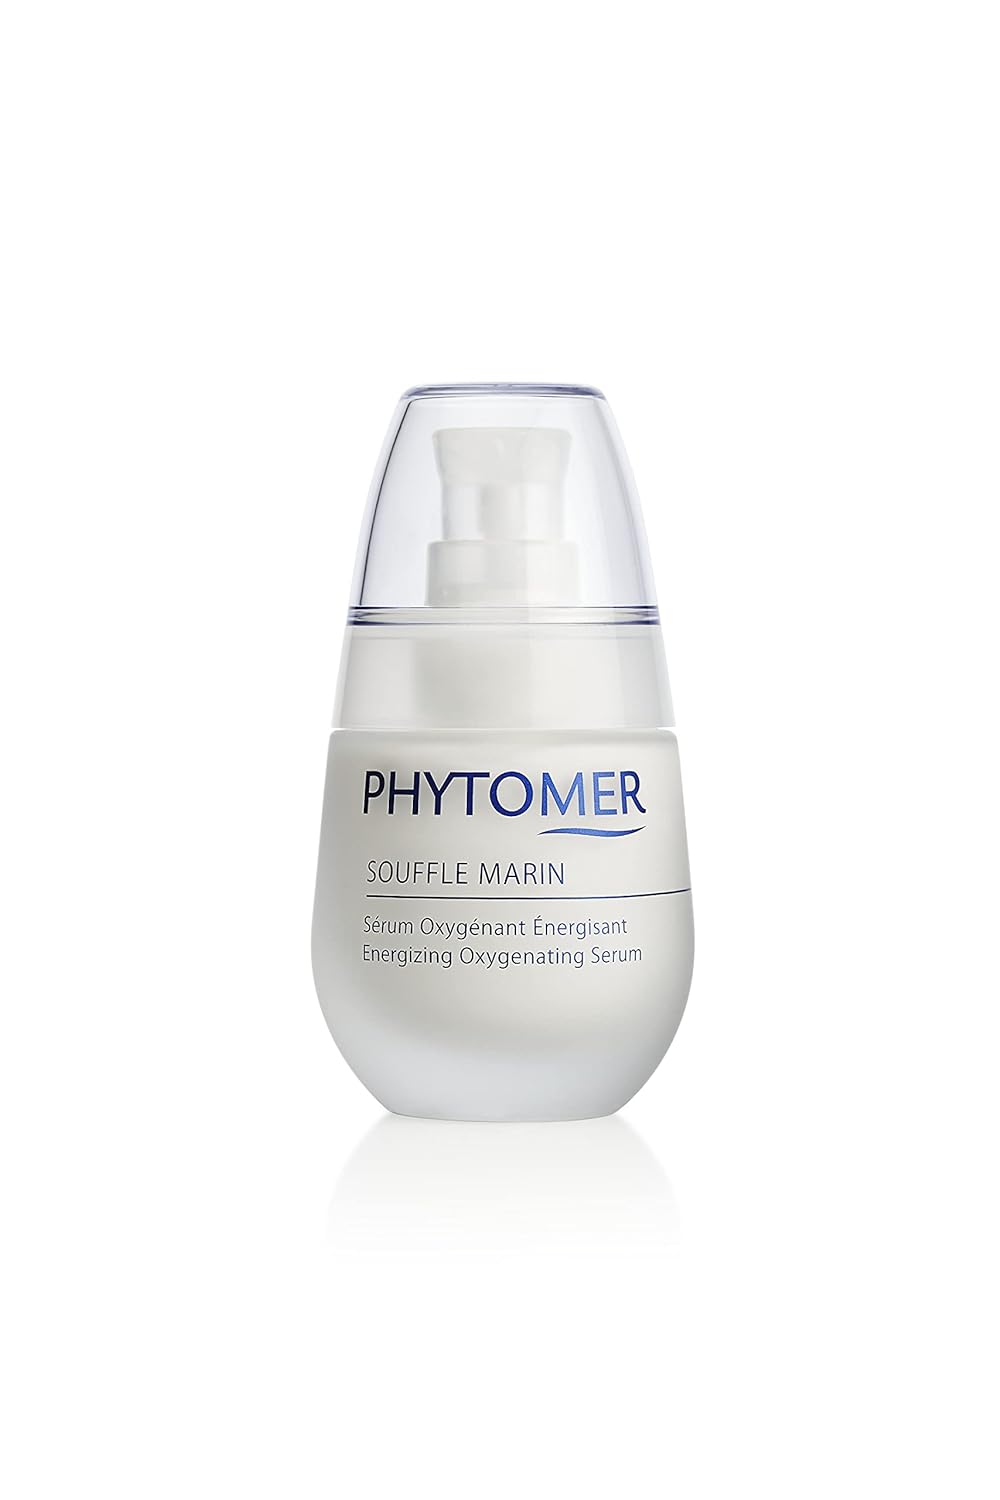 PHYTOMER Soufe Marin Energizing Face Serum | Oxygenating Anti Aging Serum for Face & Neck | Facial Cream Moisturizer Corrects Dull Skin | Protects & Hydrates | 30